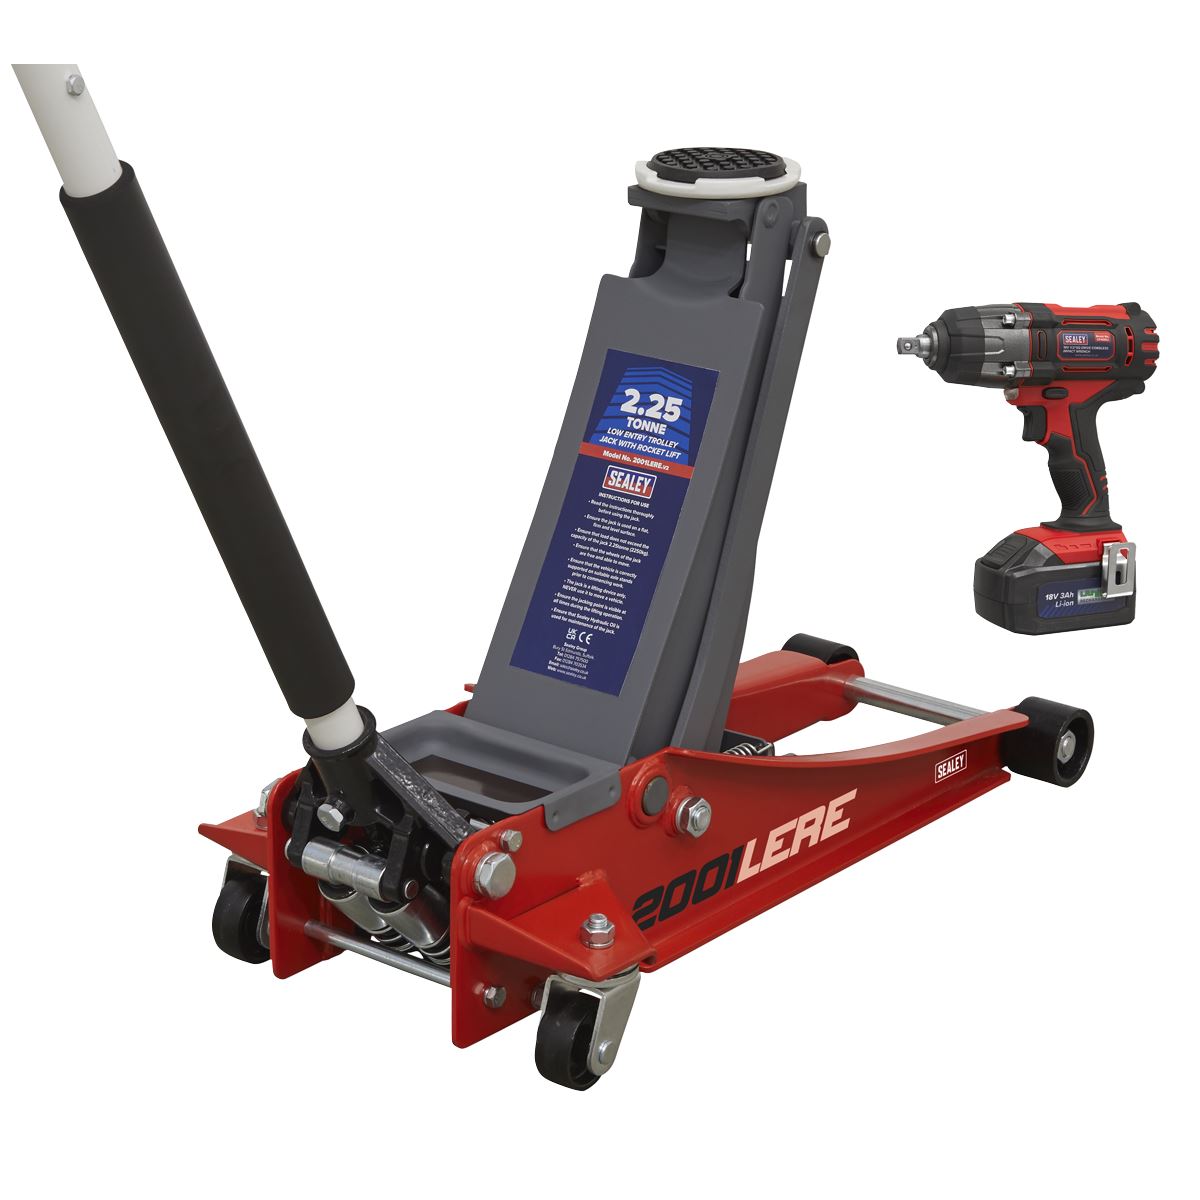 Sealey 2.2 Tonne Trolley Jack & 18V Cordless Impact Wrench - Red